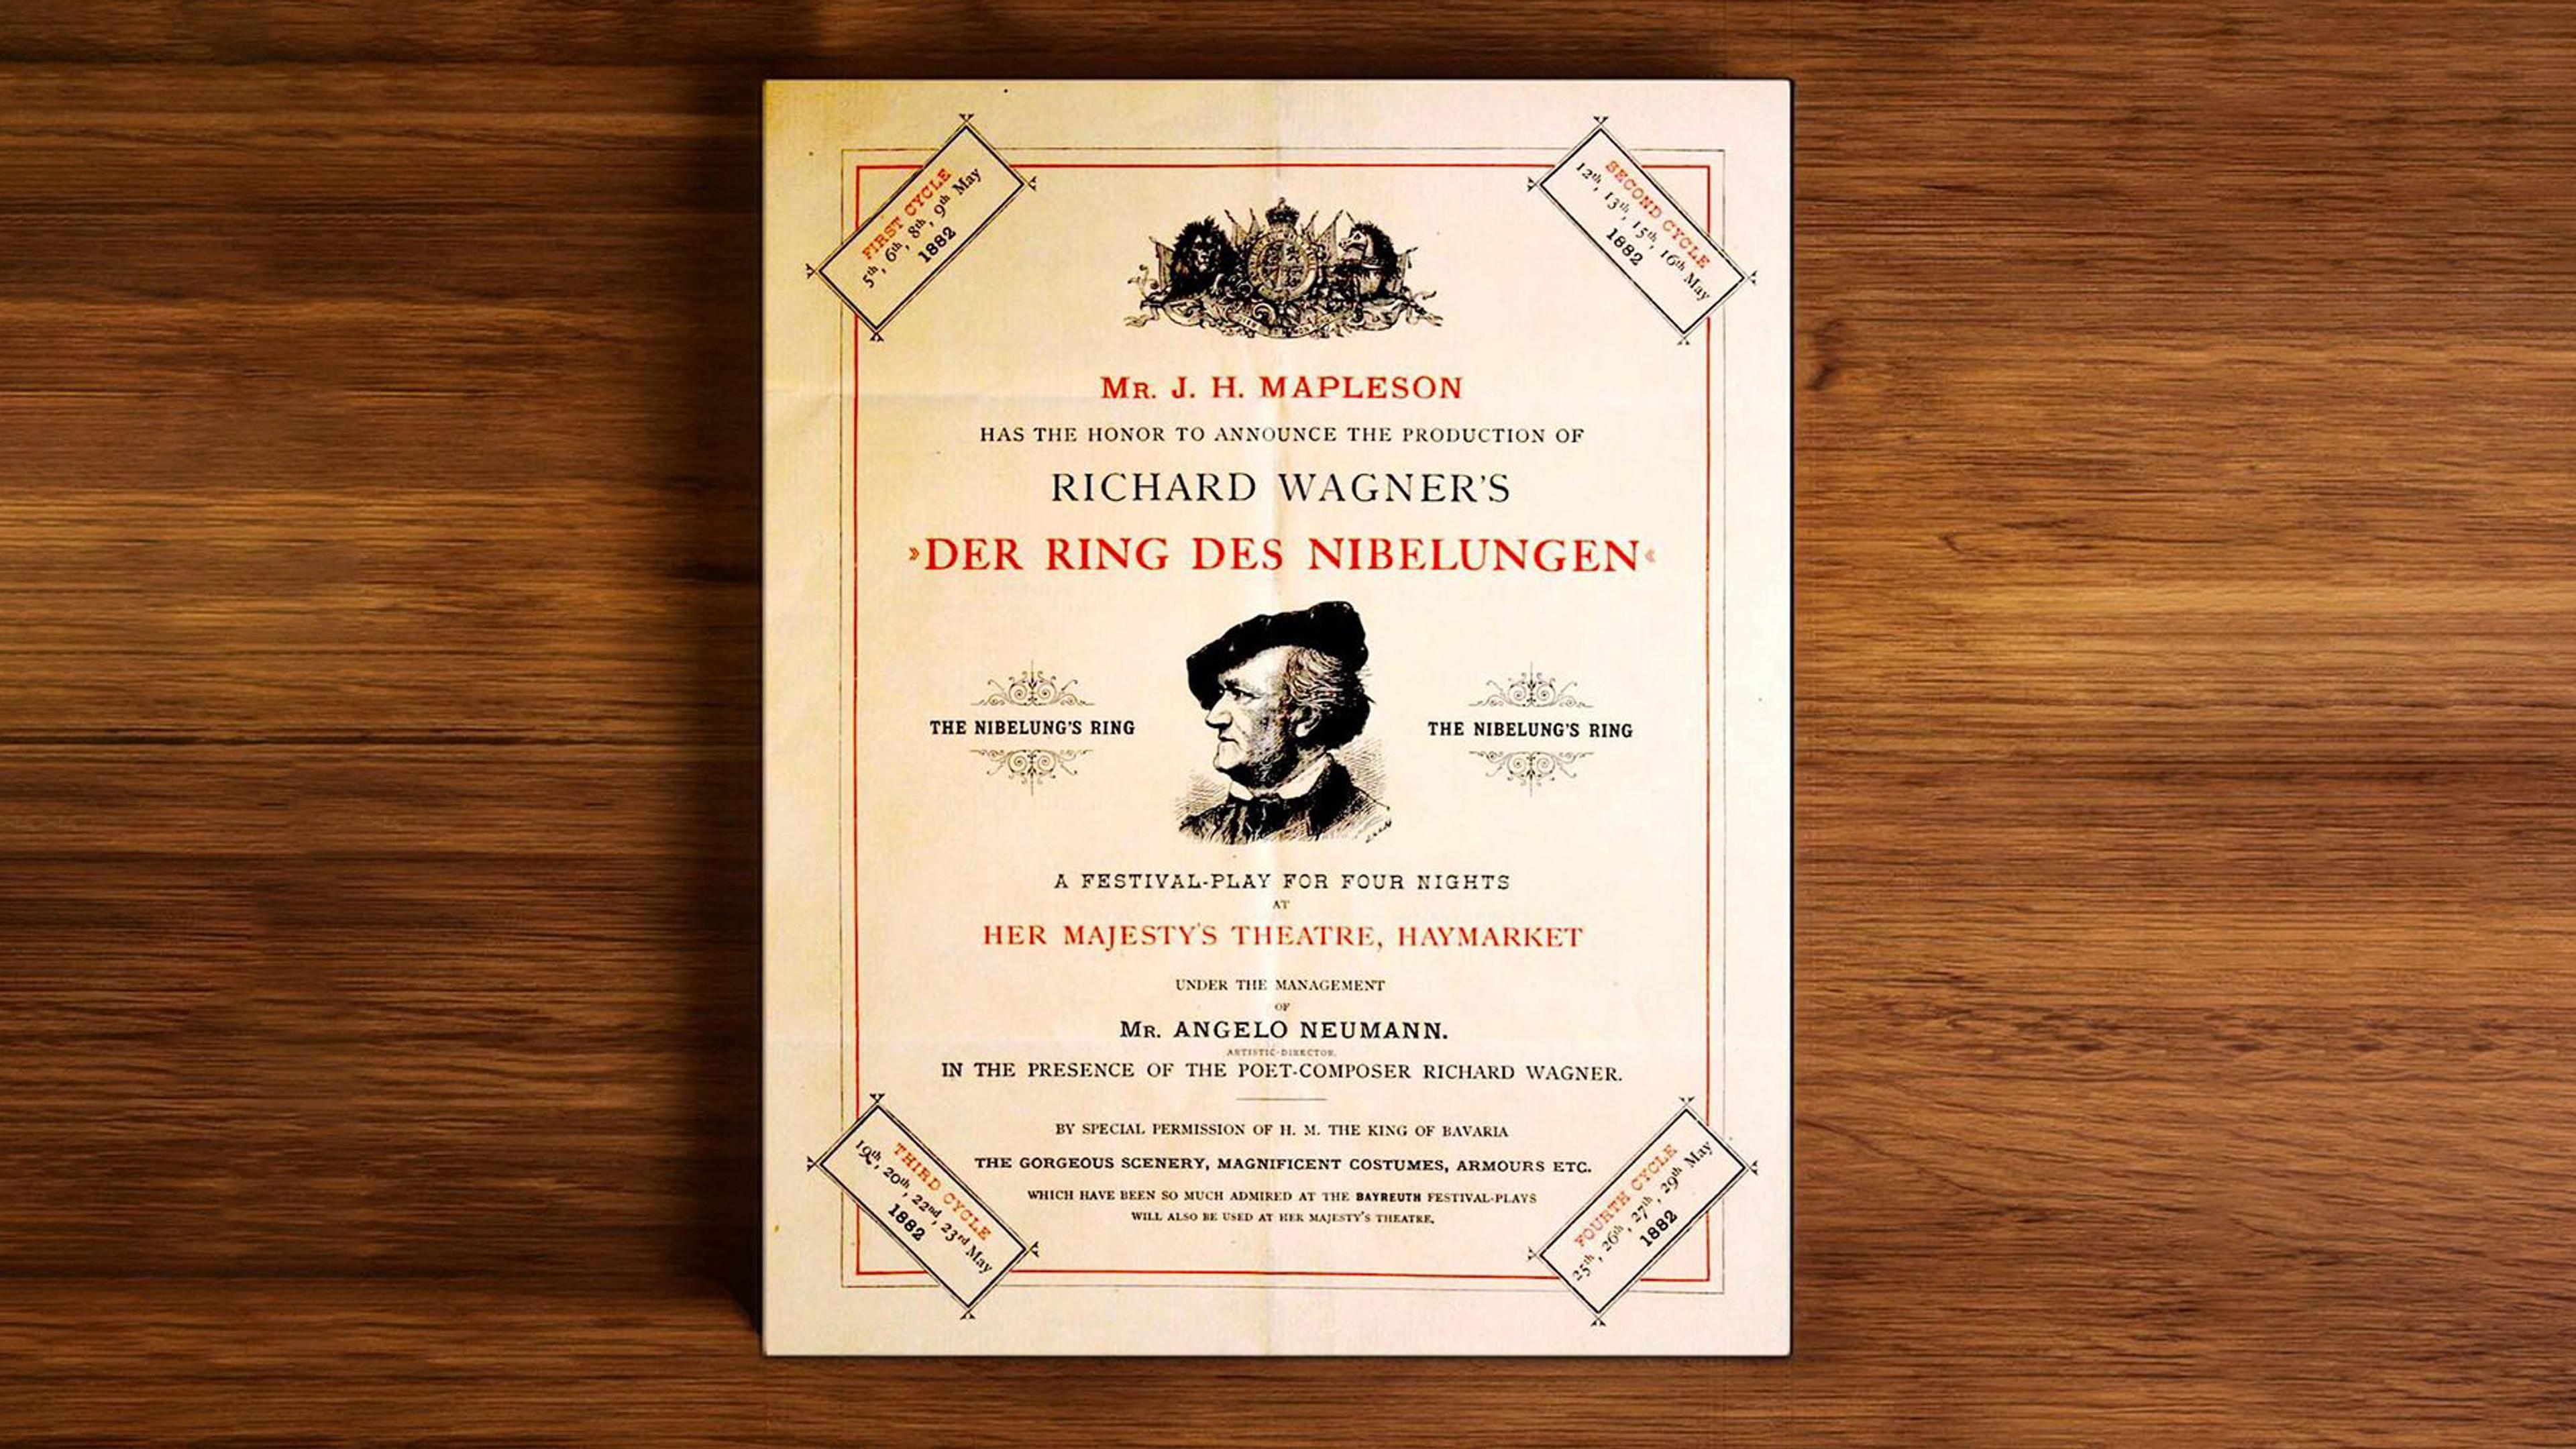 A concert programme from an 1882 performance of Wagner's Ring Cycle